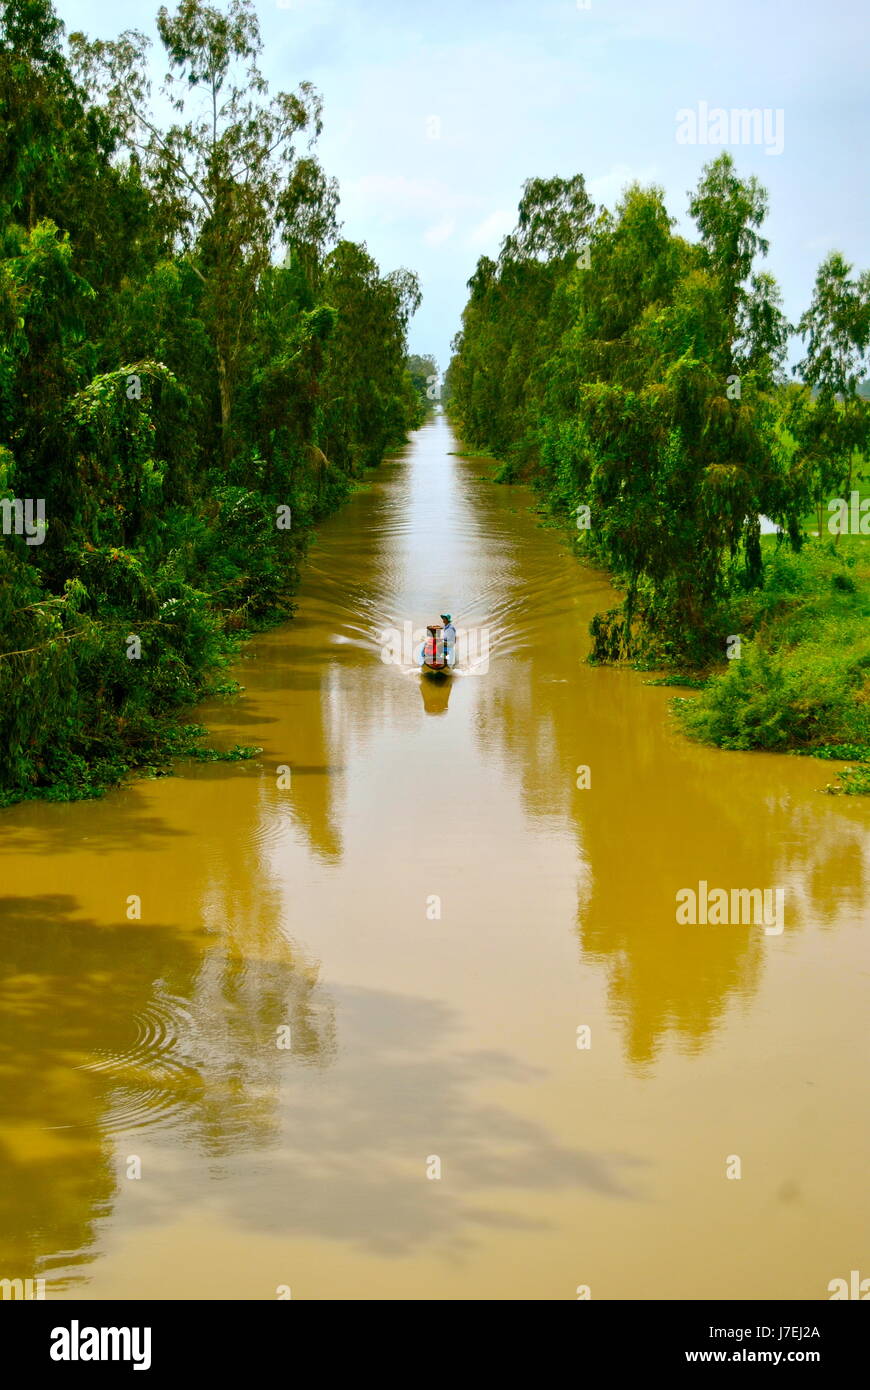 Boat on a peaceful canal, Can Tho province, Vietnam Stock Photo